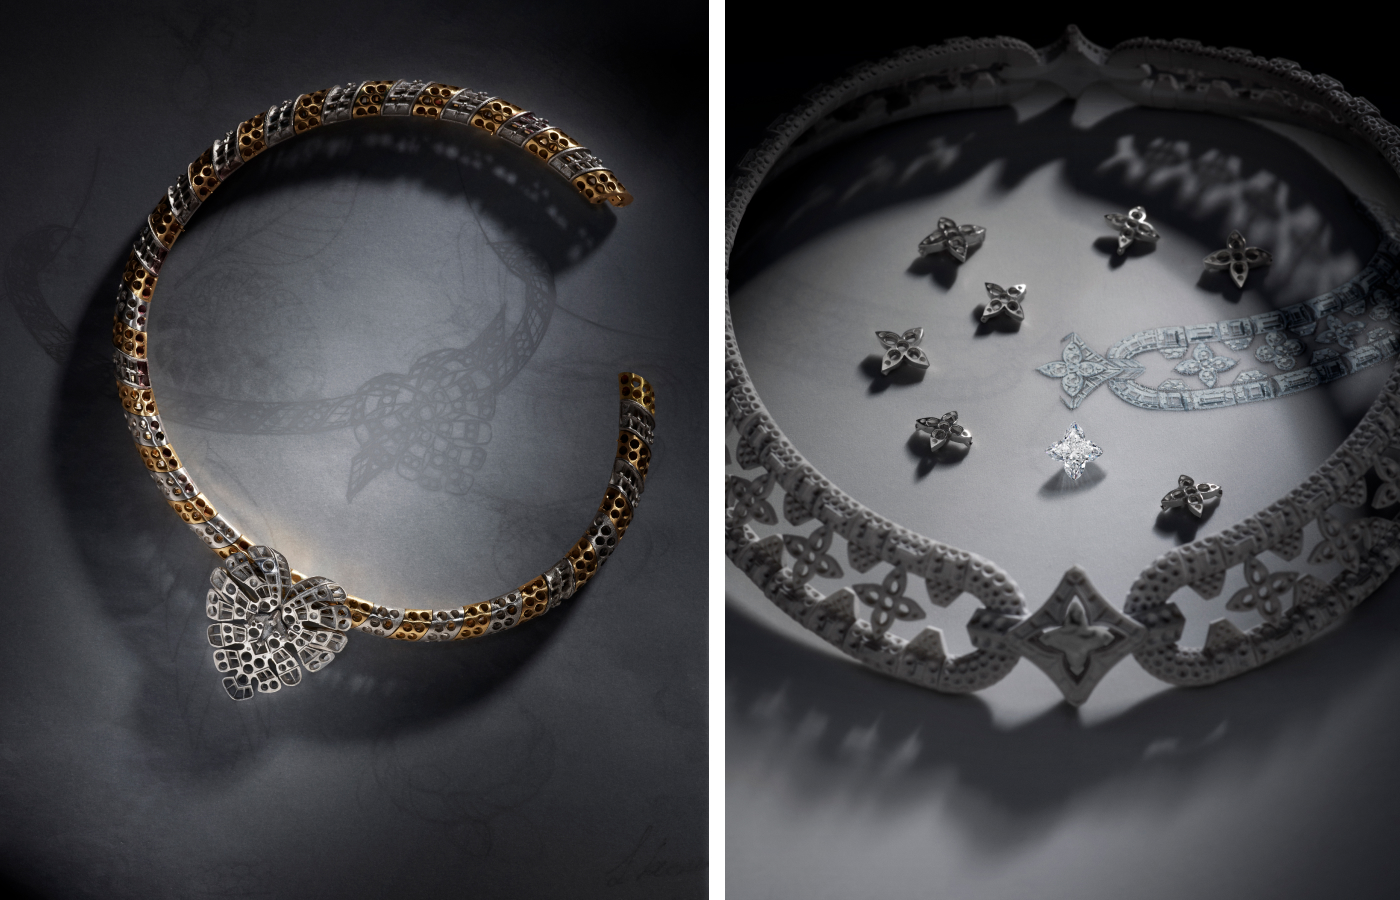 The Plants necklace in progress (left) and the LV Mongram cut diamonds in the Bones necklace, both from the Louis Vuitton Deep Time Chapter II High Jewellery collection 